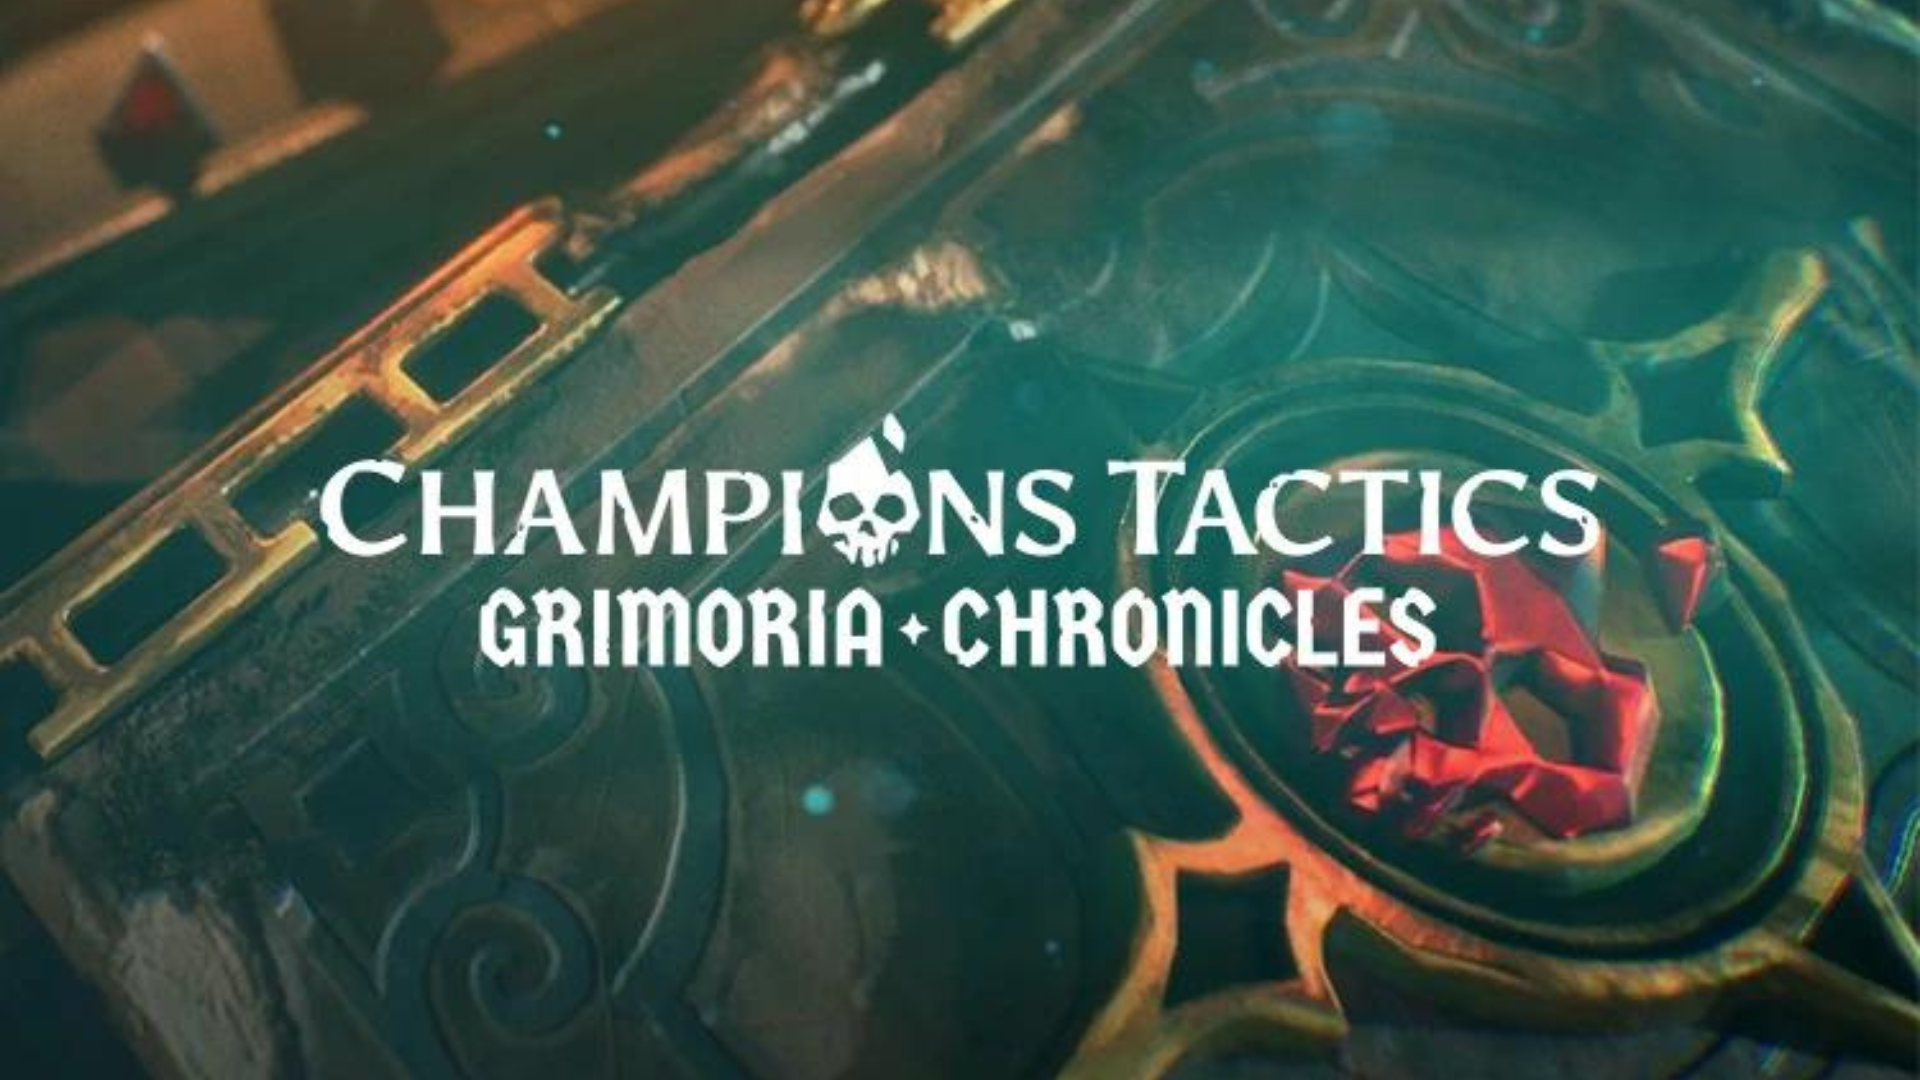 image of a video game screenshot with he worlds 'champions tactics grimora chronicles' over the top for Ubisoft web3 venture